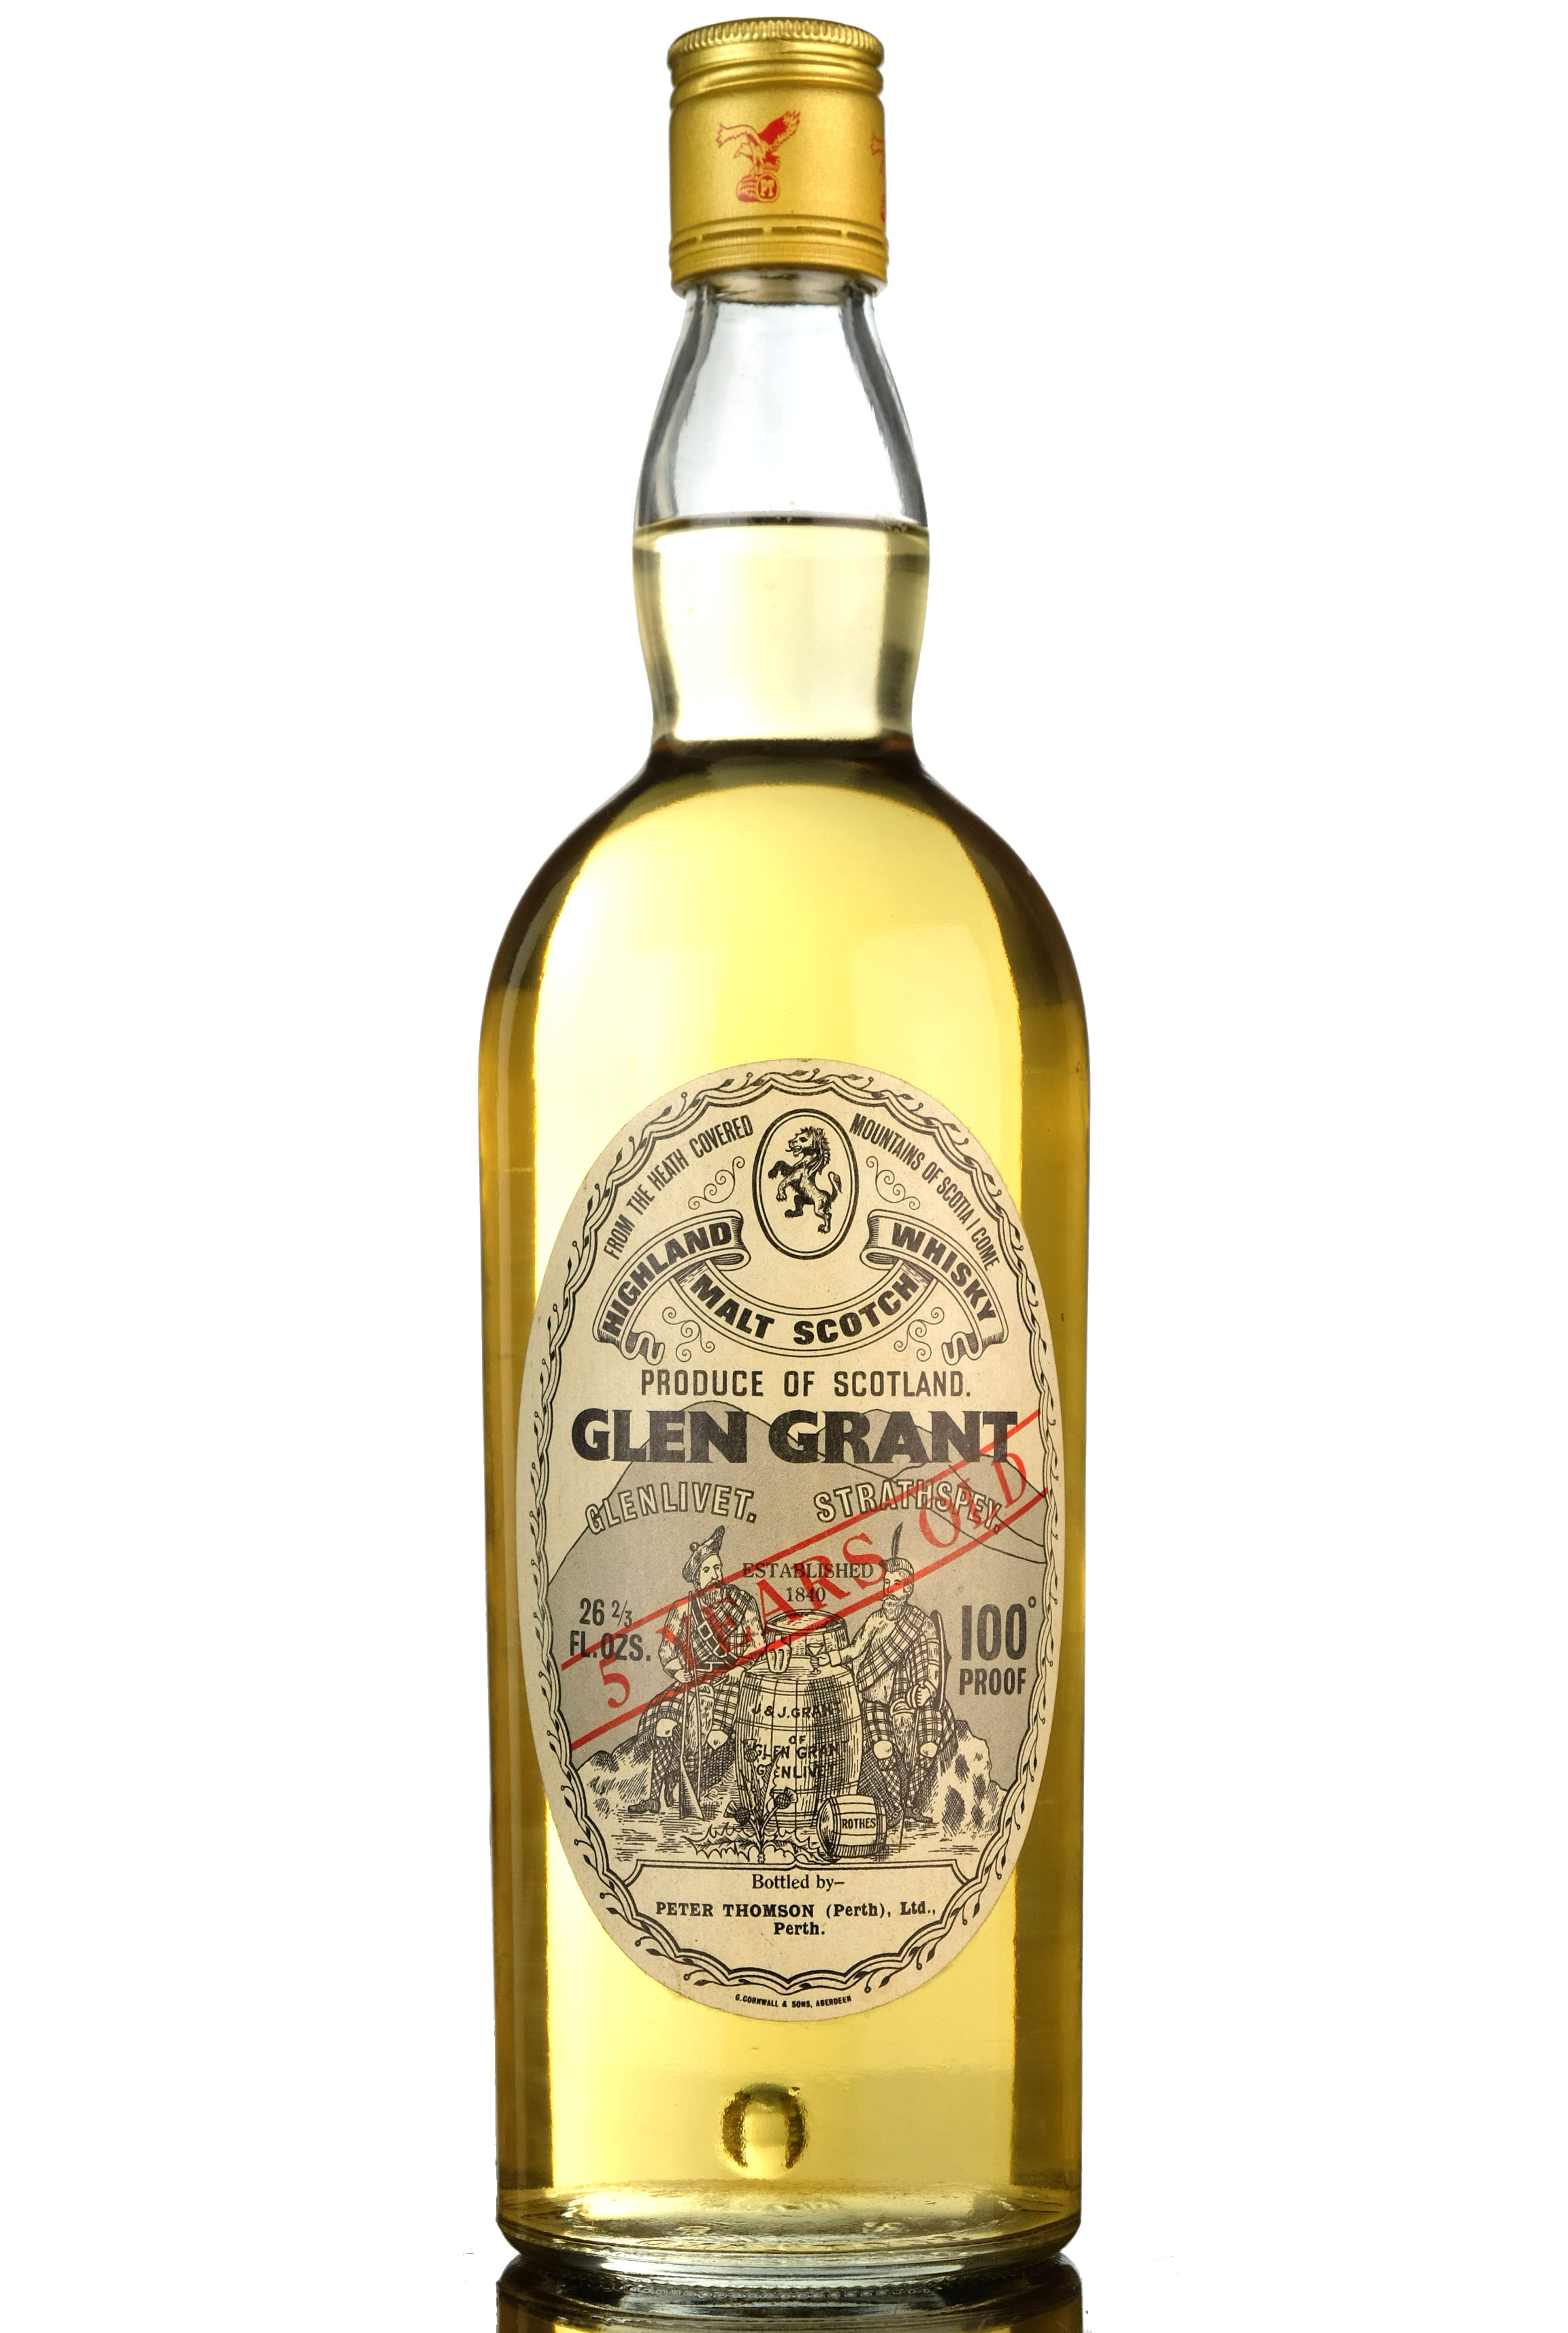 Glen Grant 5 Year Old - Peter Thomson - 100 Proof